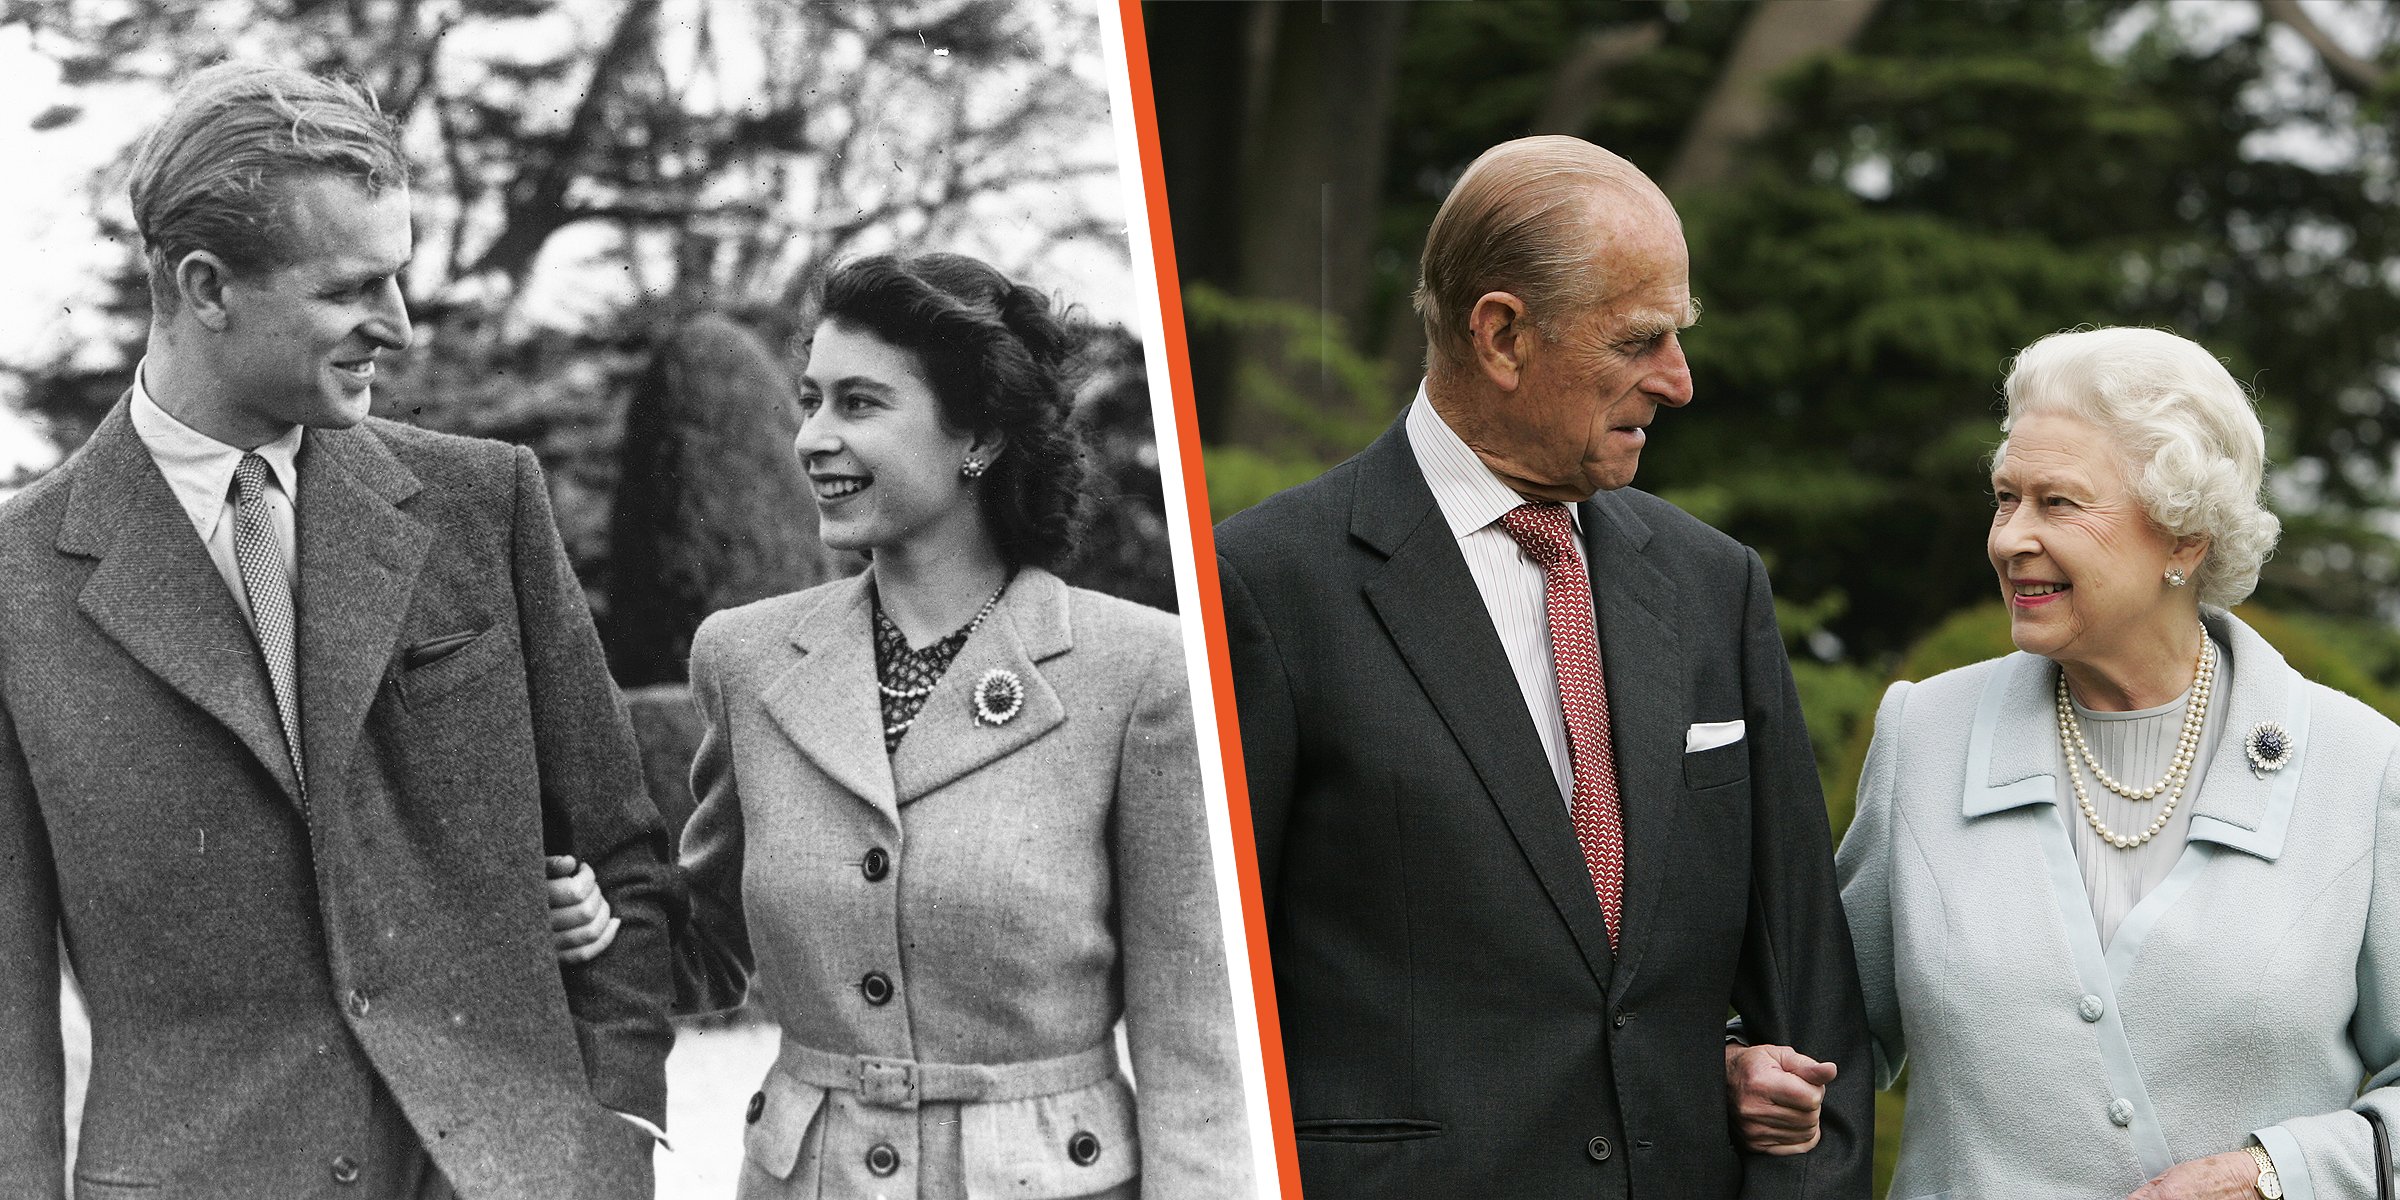 Prince Philip and The Queen, 1947 and 2007 | | Source: Getty Images